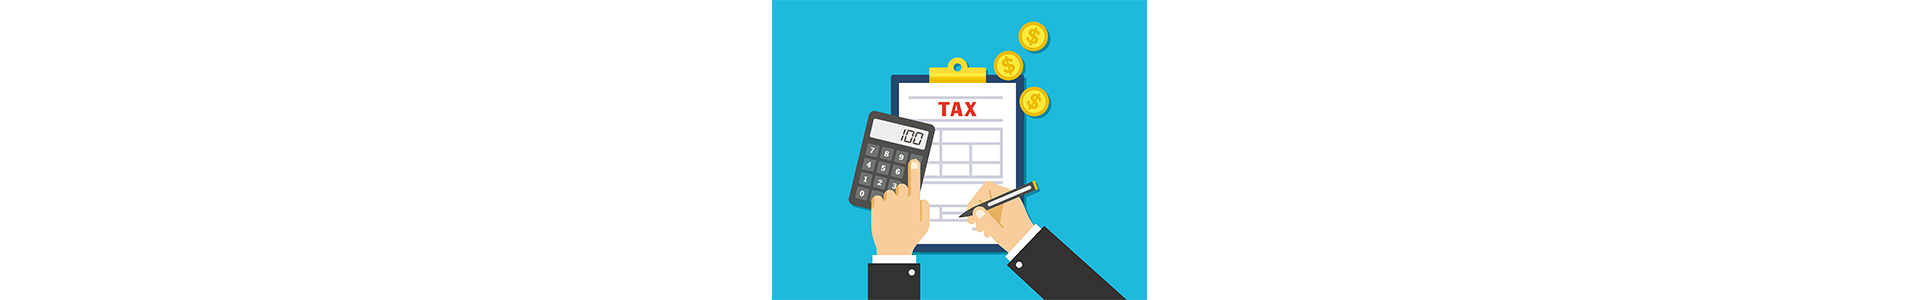 Salaries Tax | Tax Calculator & Everything you Need to Know about Tax | A Comprehensive Guide to the Salaries Tax Rates